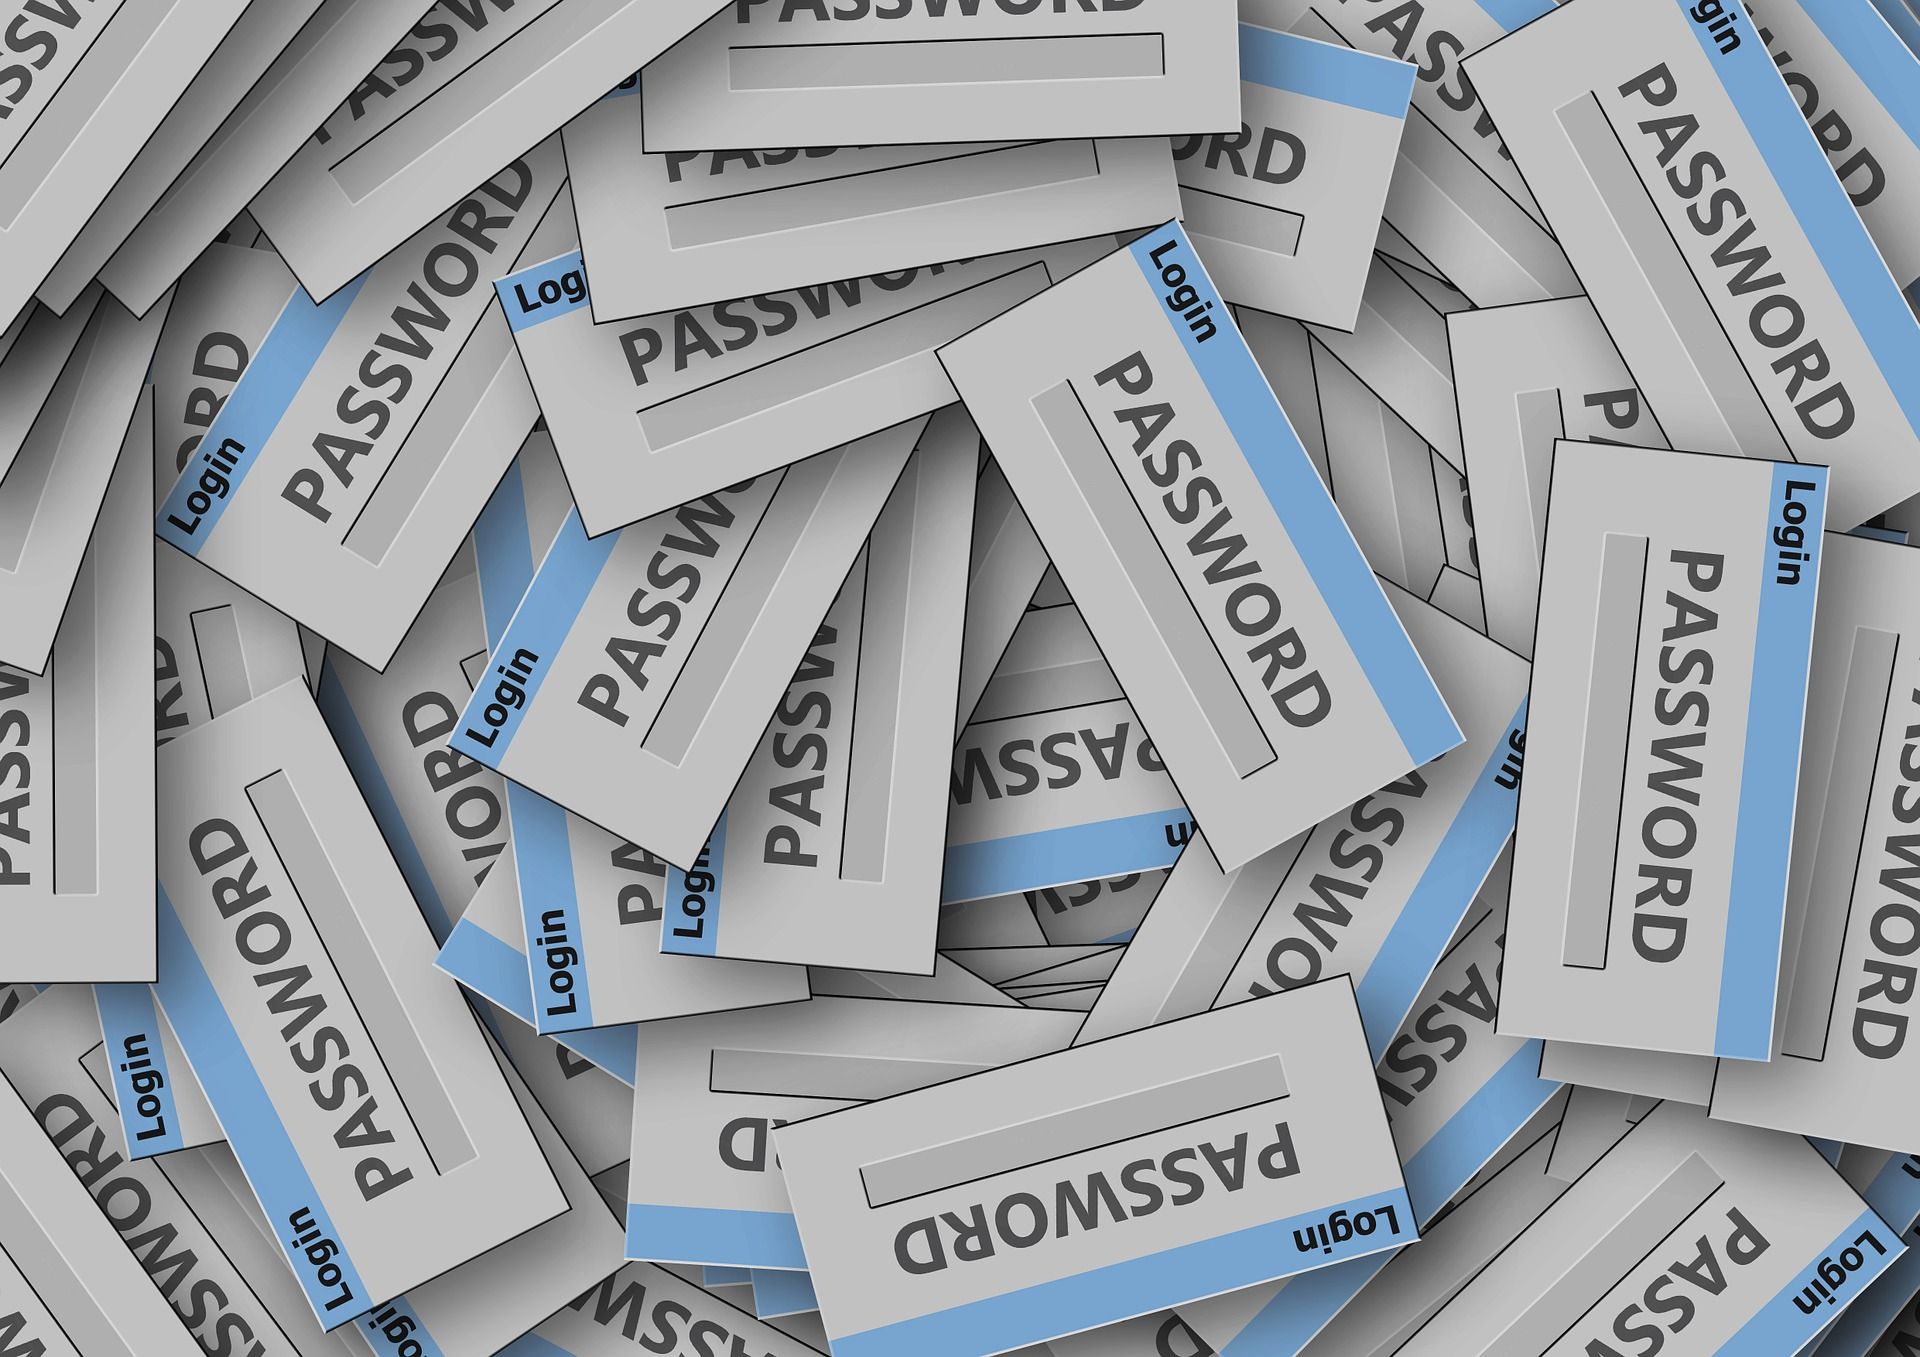 Why use Password Managers